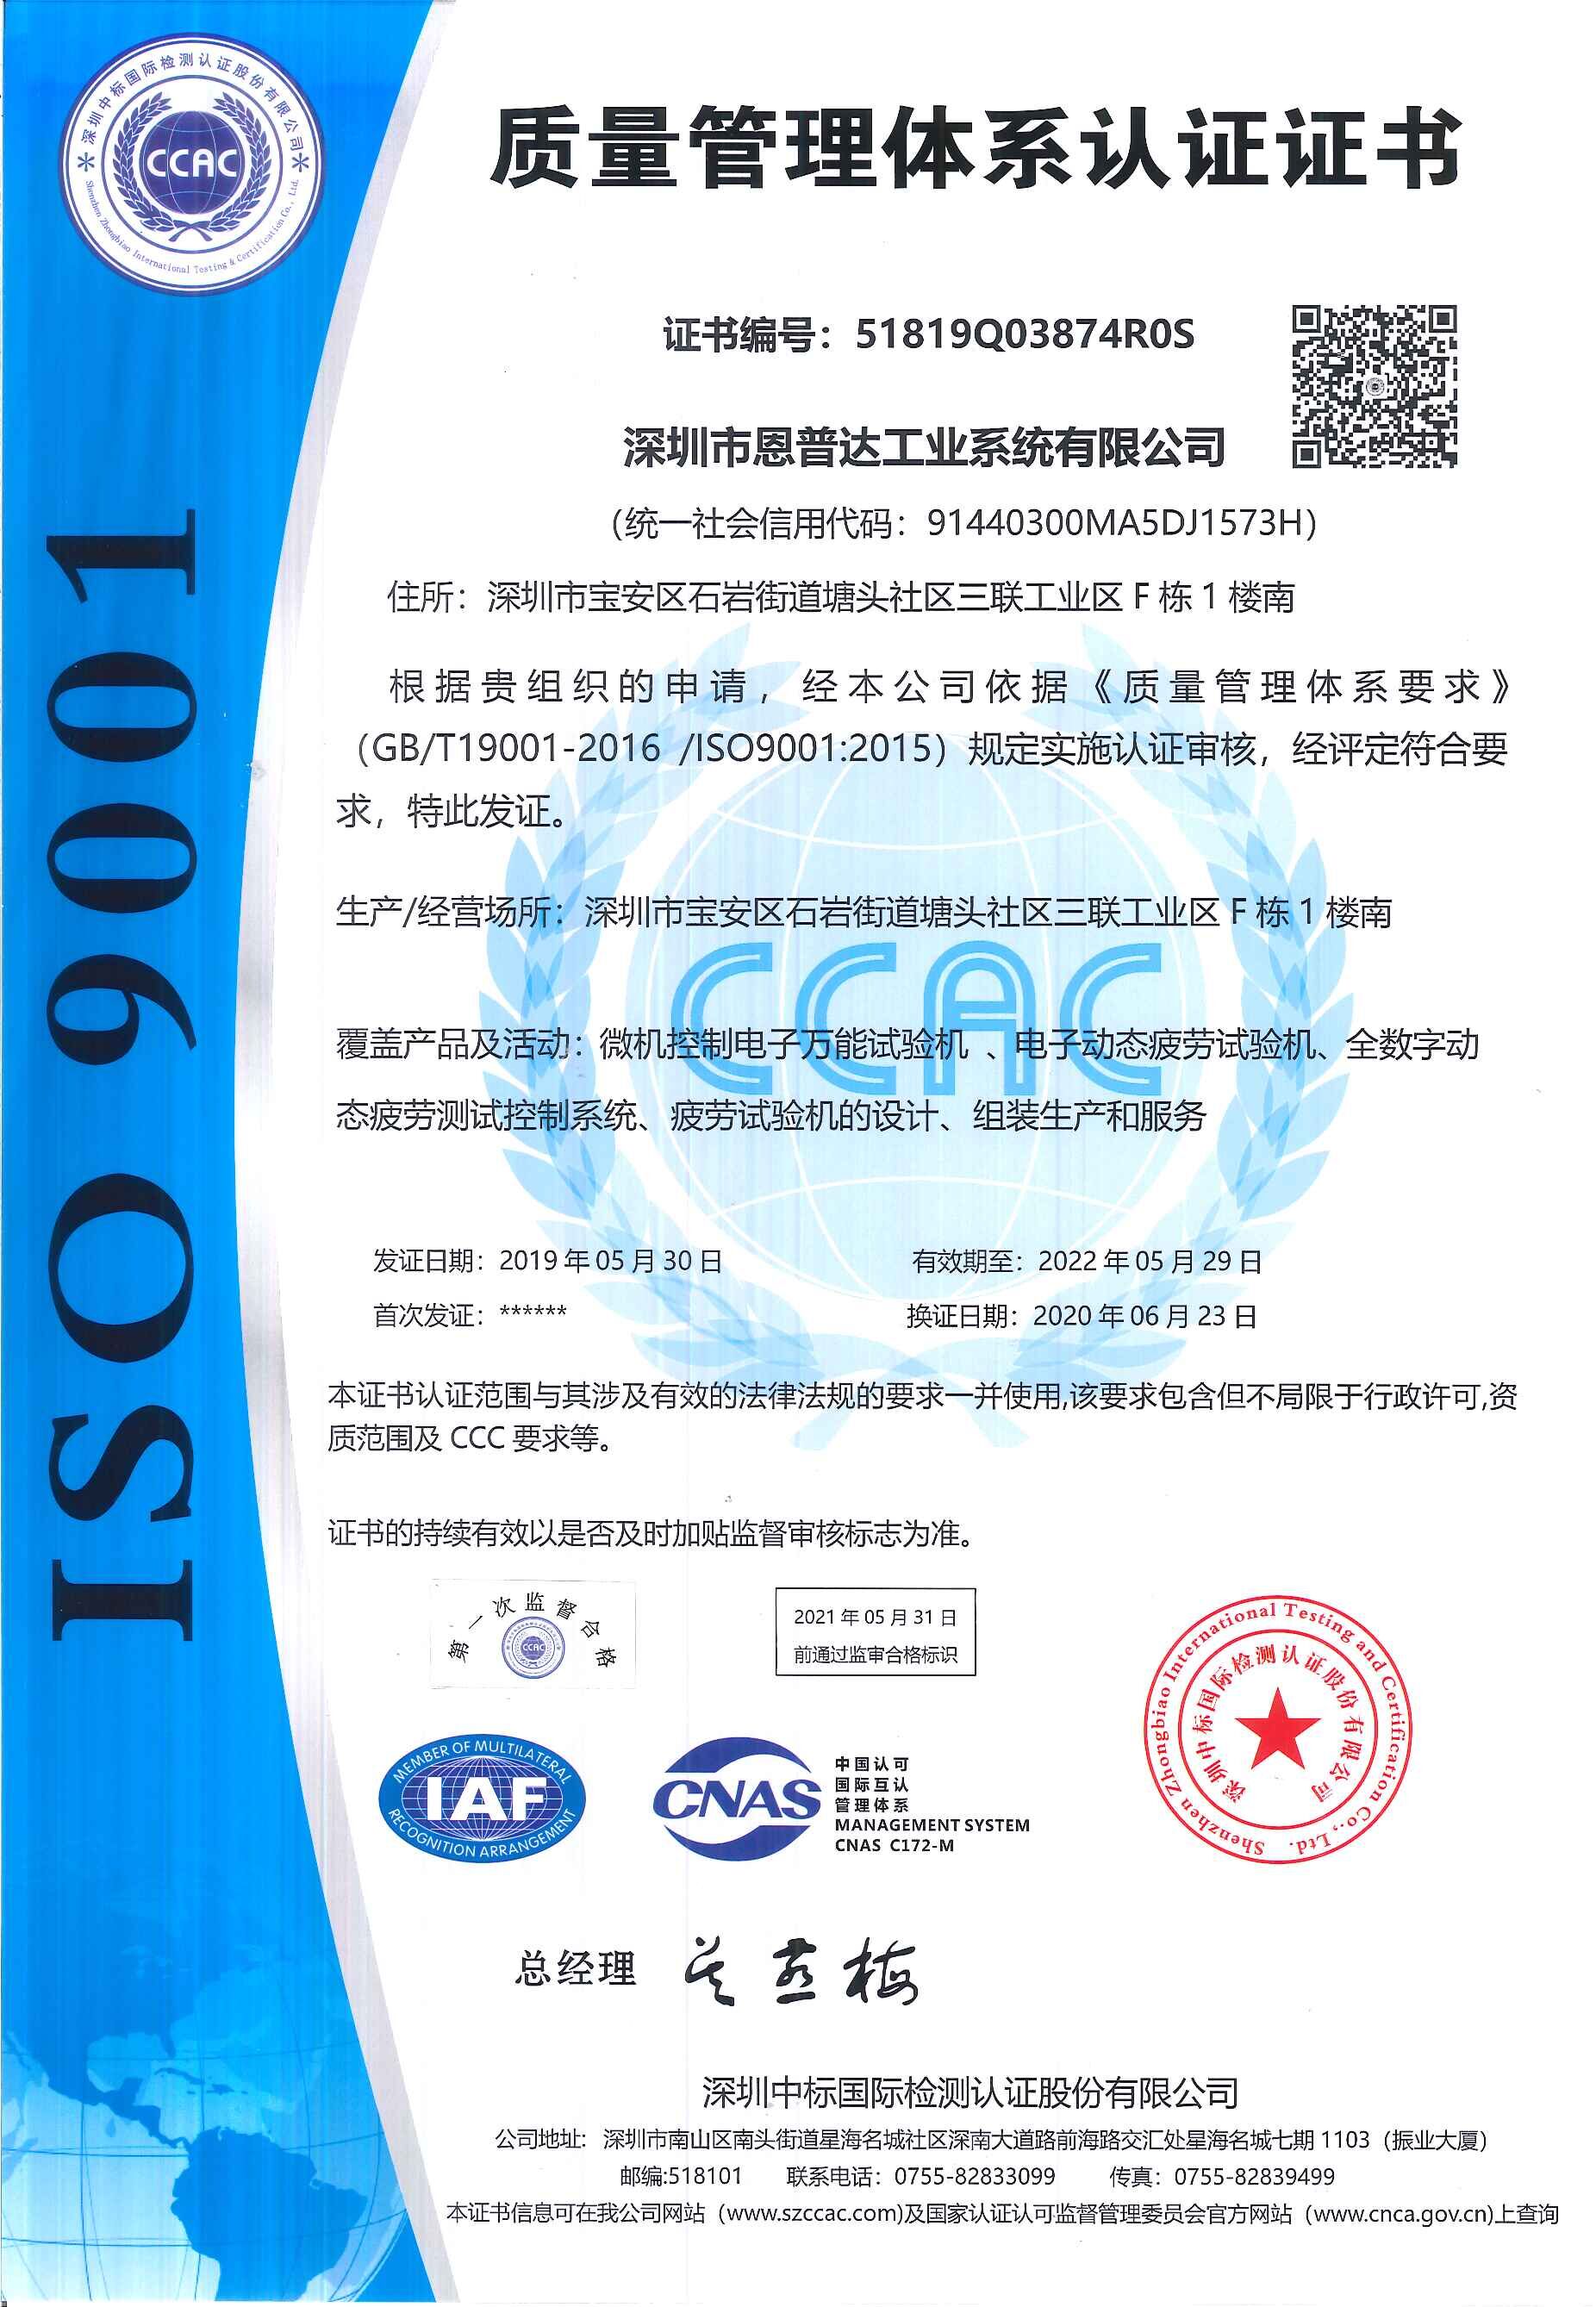 Warmly congratulate our company on obtaining "ISO" certification